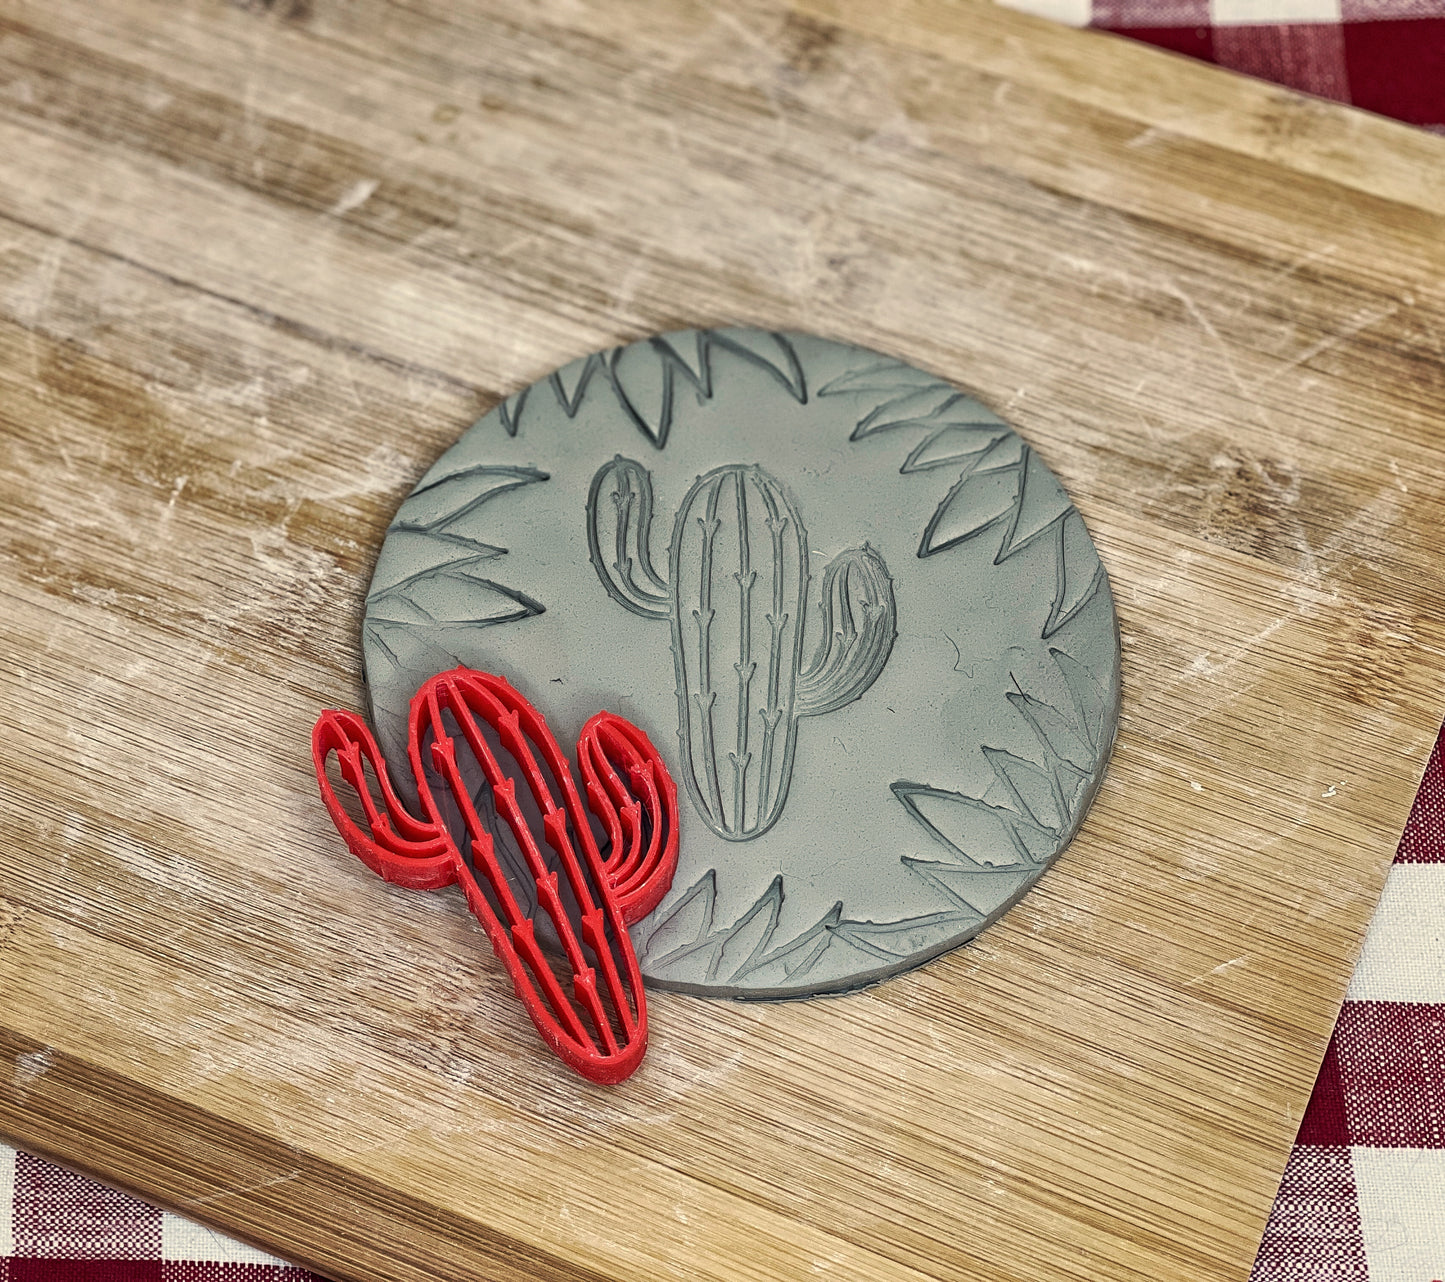 Cactus / Succulent Set Pottery Stamp - available as a set or each, plastic 3D printed, multiple sizes